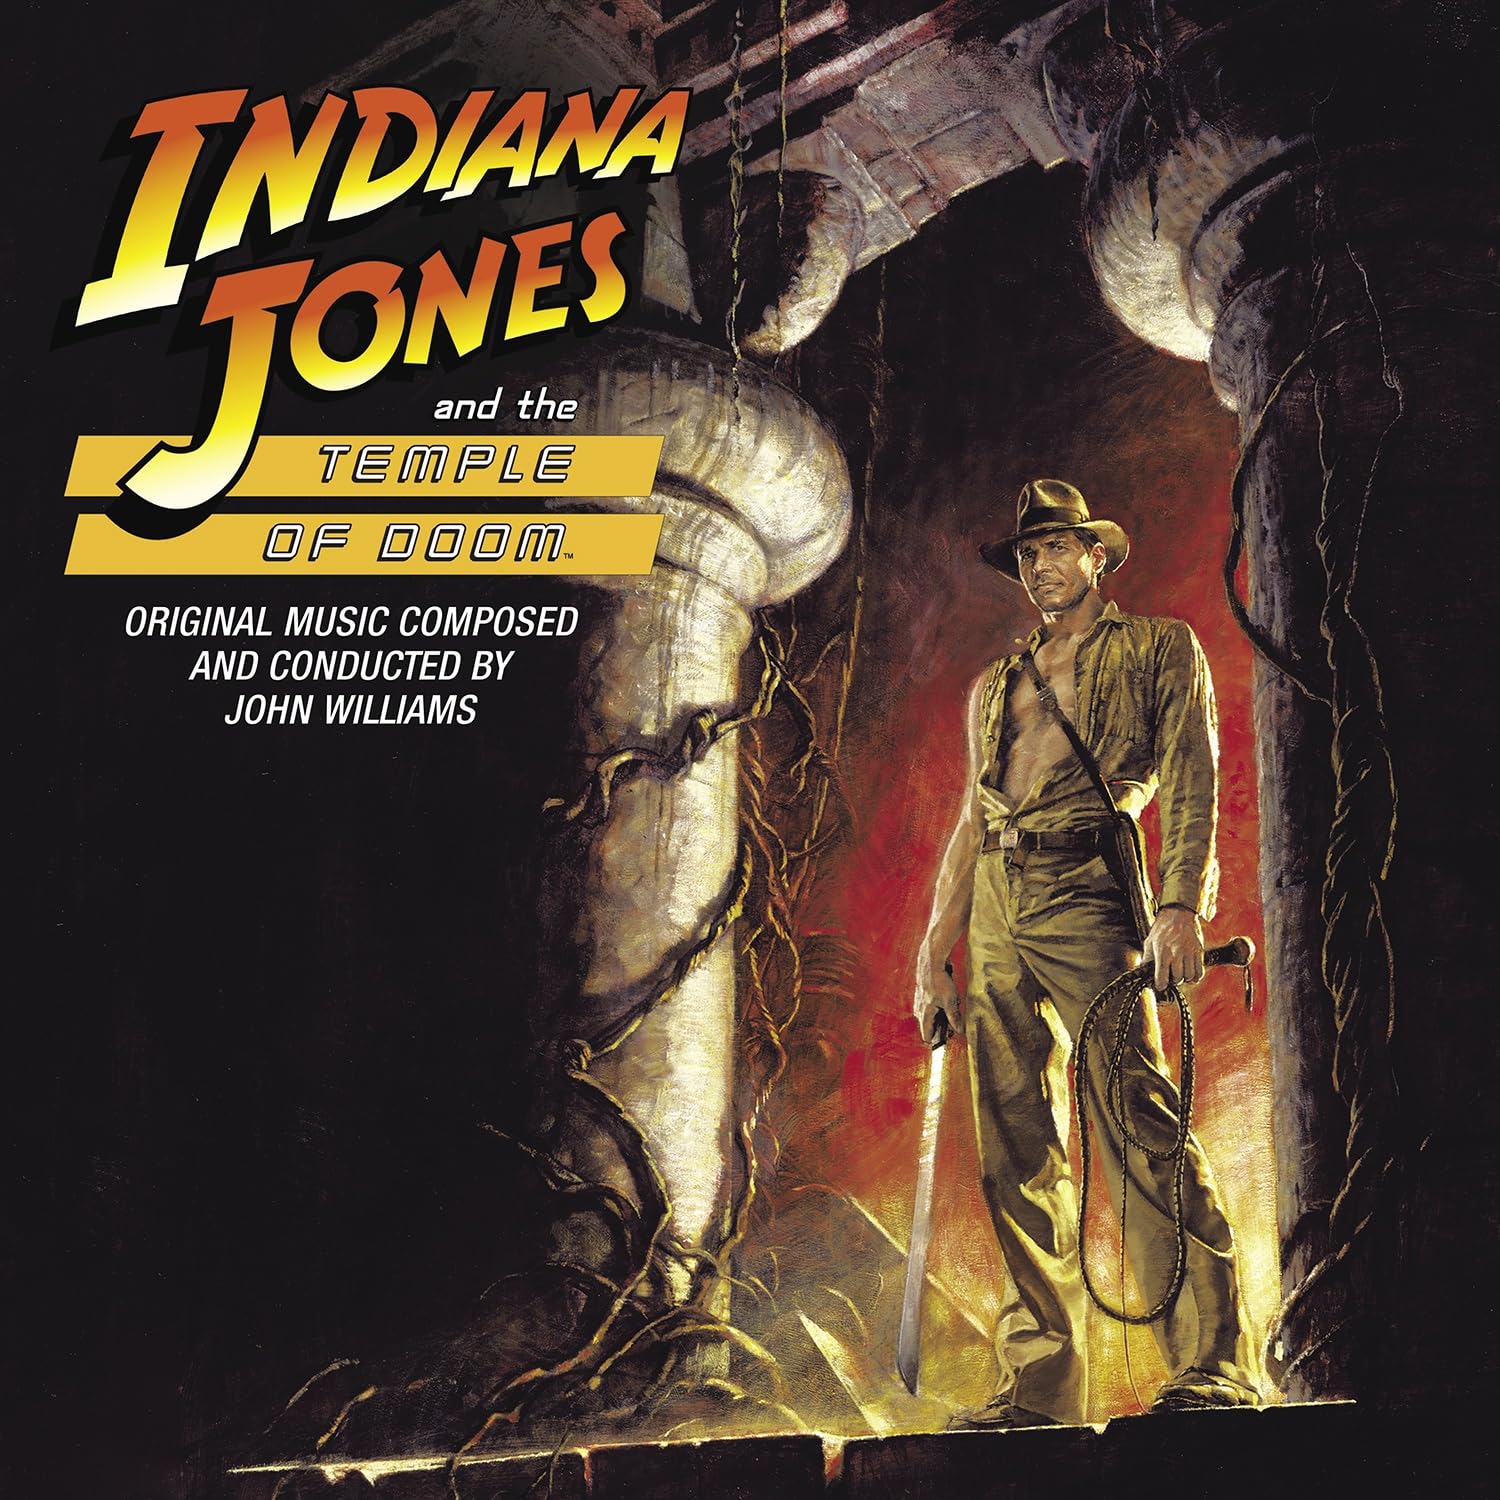 O.S.T. – INDIANA JONES AND THE TEMPLE OF DOOM LP2